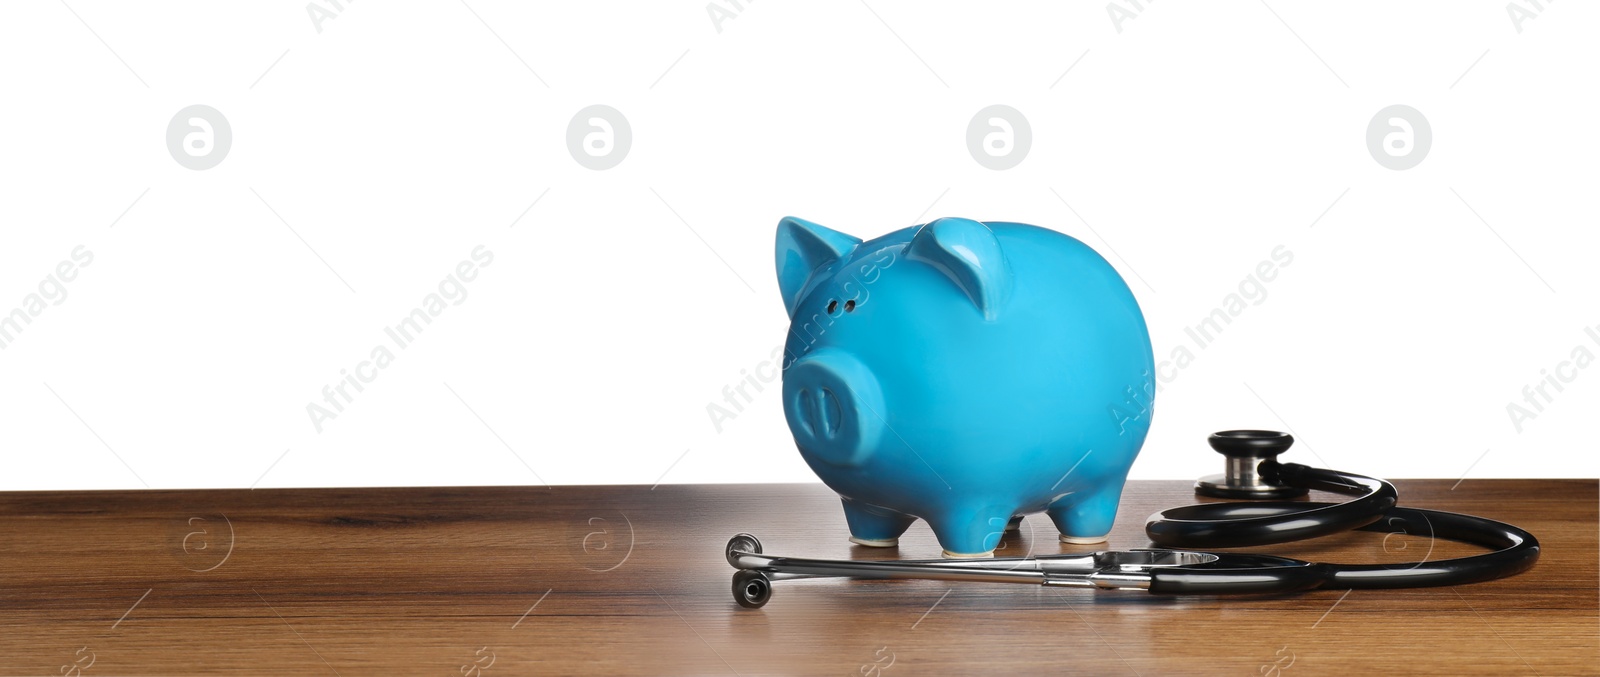 Photo of Piggy bank and stethoscope on wooden table against white background, space for text. Medical insurance